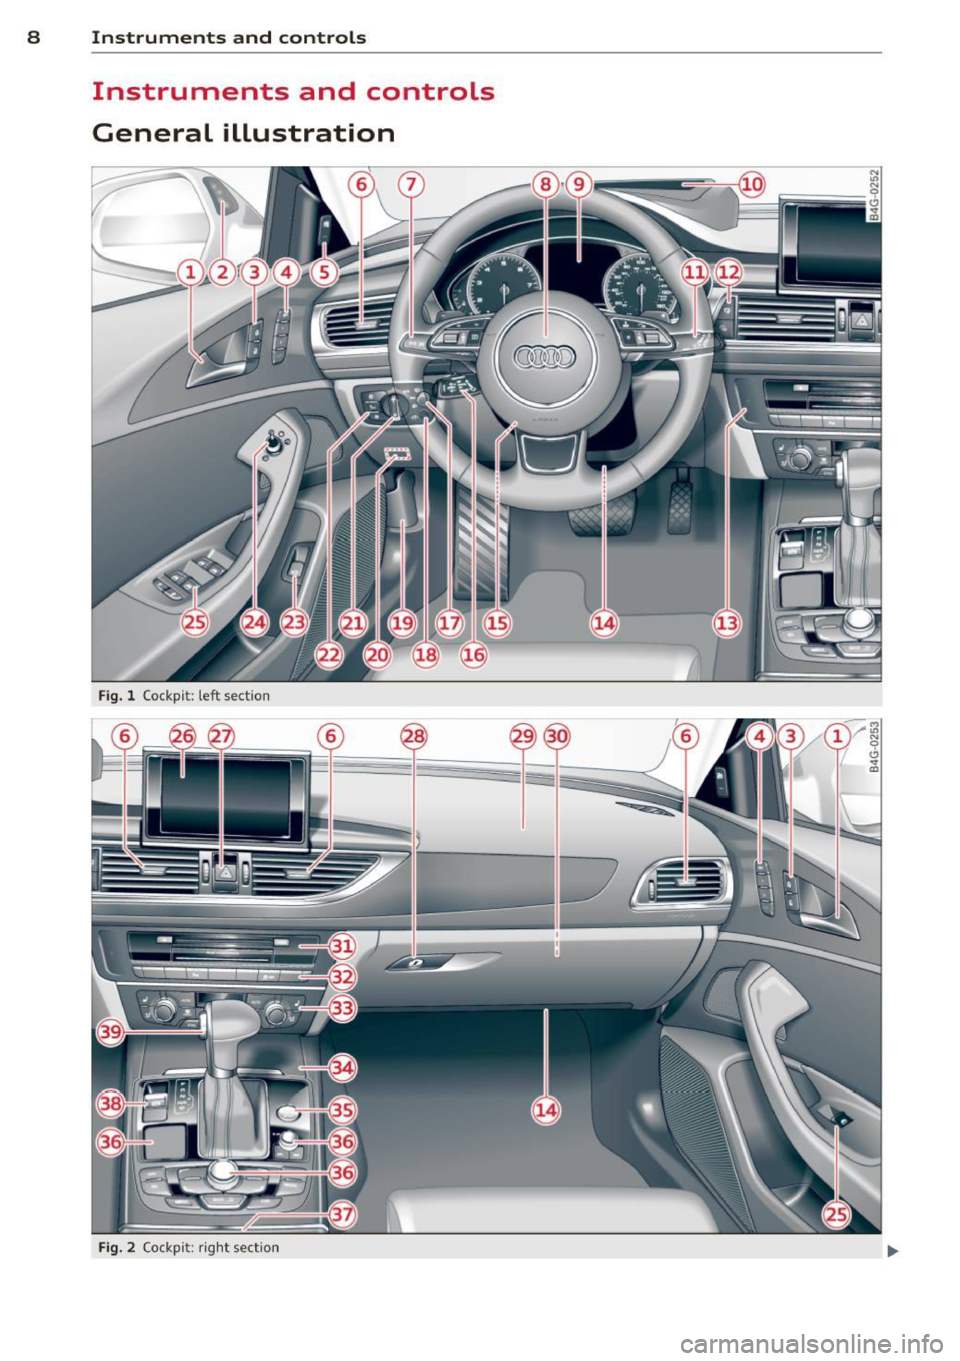 AUDI S6 2014  Owners Manual 8  Instruments and controls 
Instruments  and  controls 
General  illustration 
Fig. l Cockp it:  left  sect io n 
Fig. 2 Co ck pi t: ri ght  sect io n  